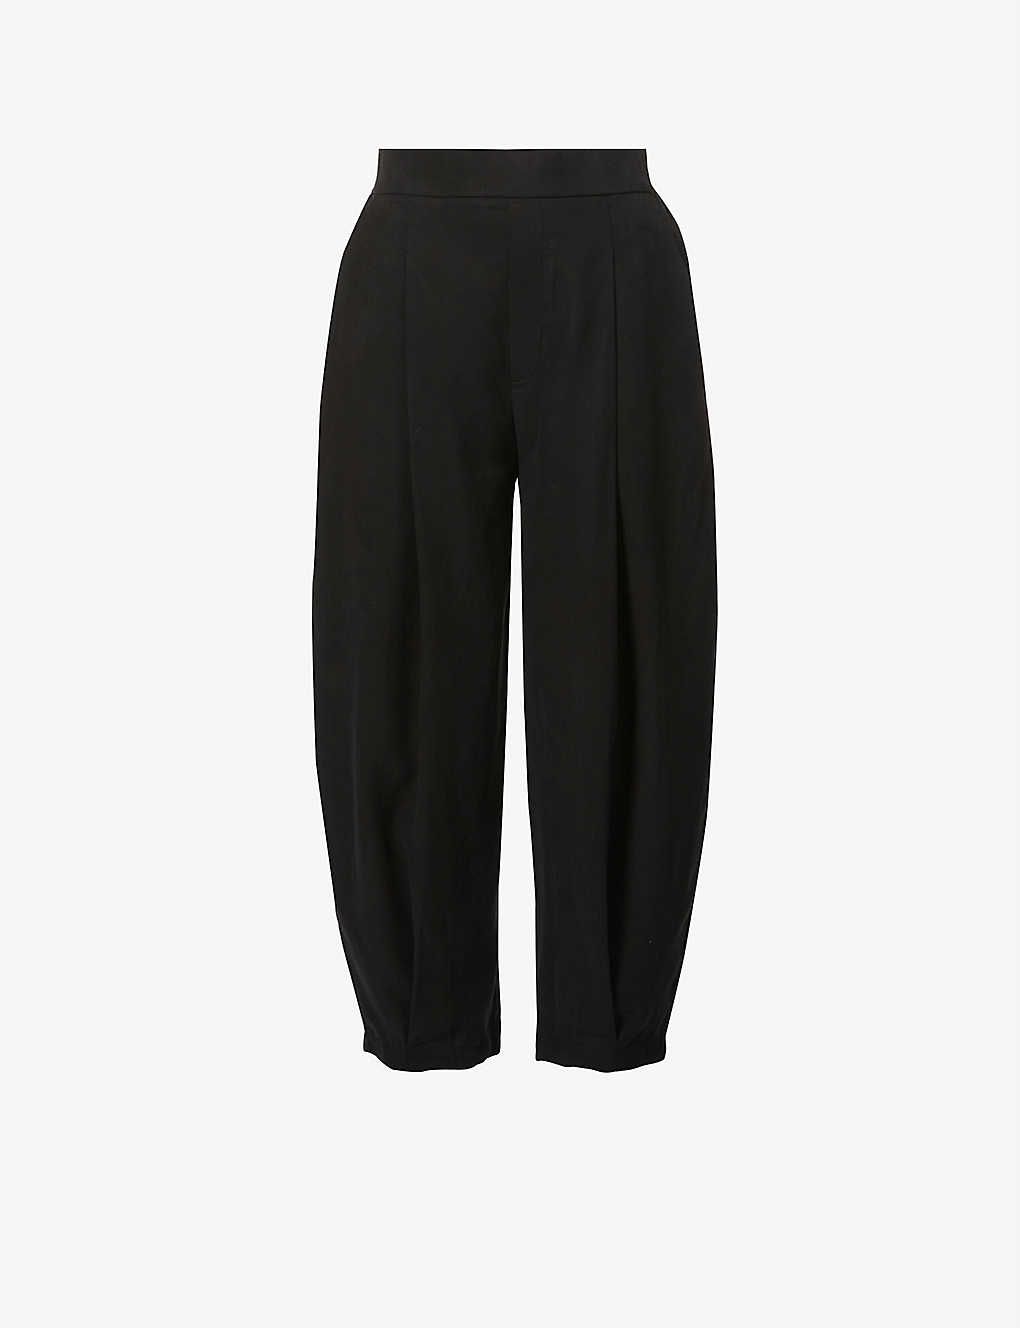 BENETTON Cropped high-rise woven trousers | Selfridges